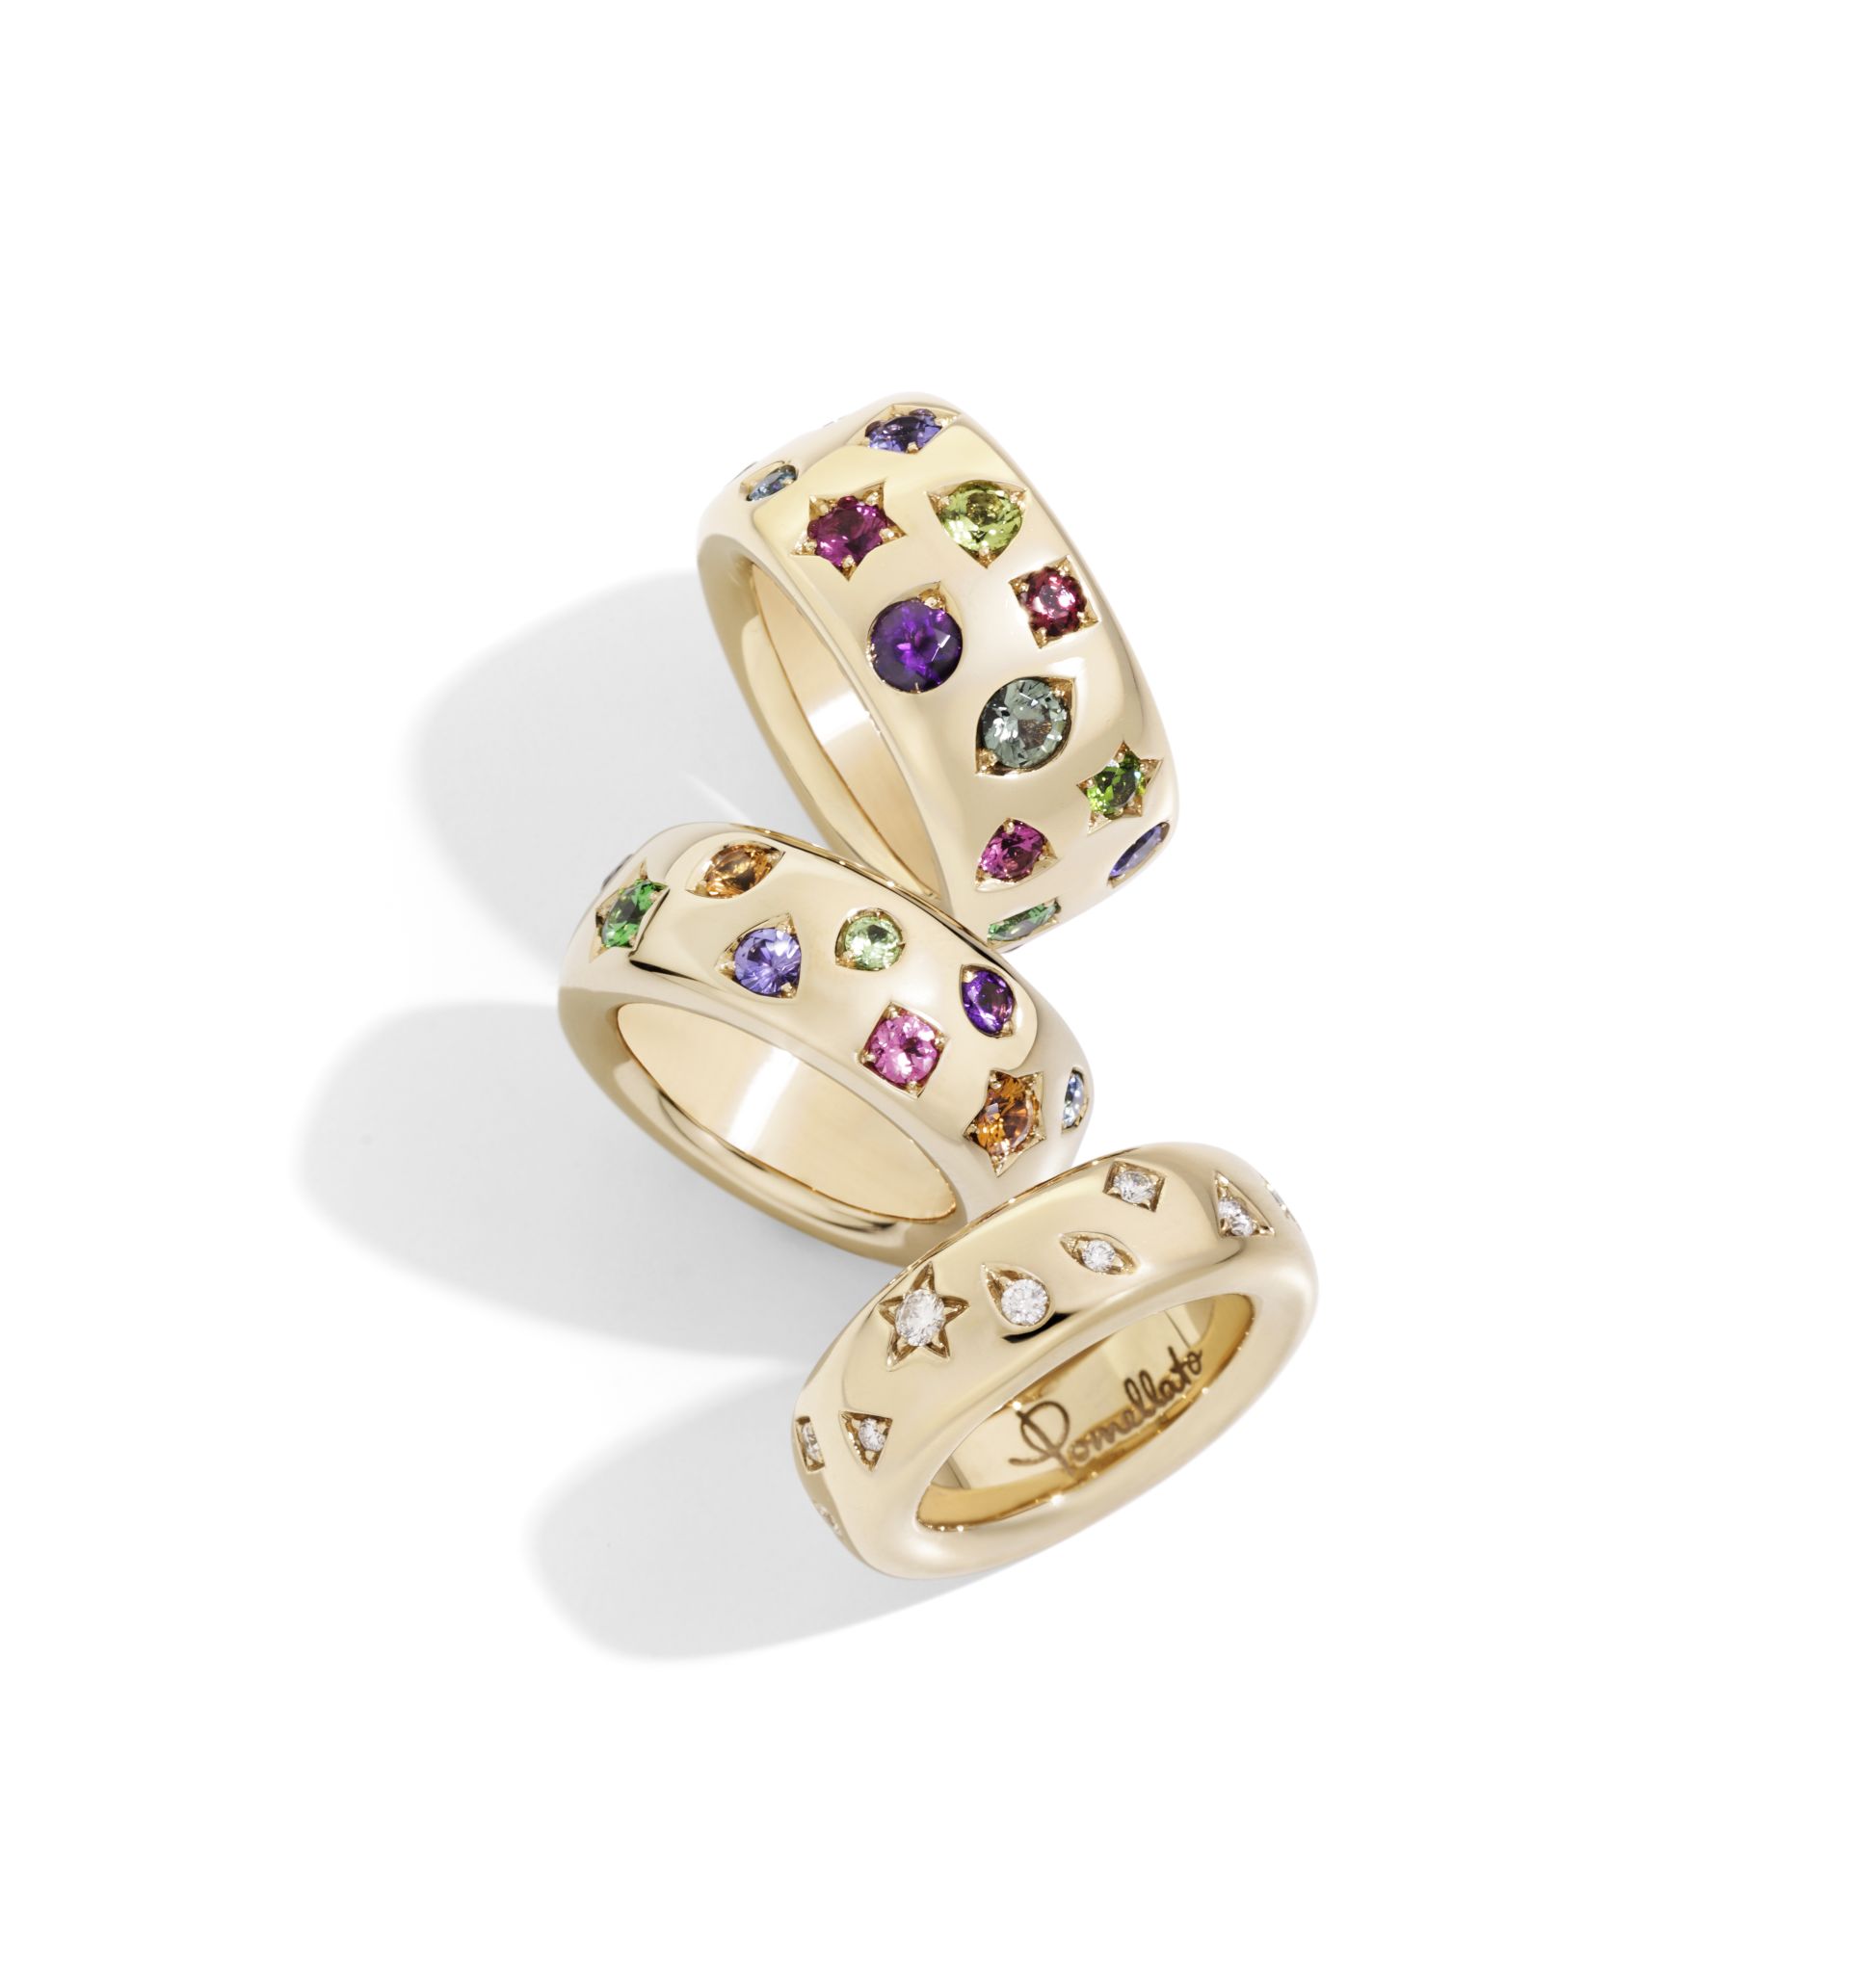 Gold rings with small multi-colored jewels.